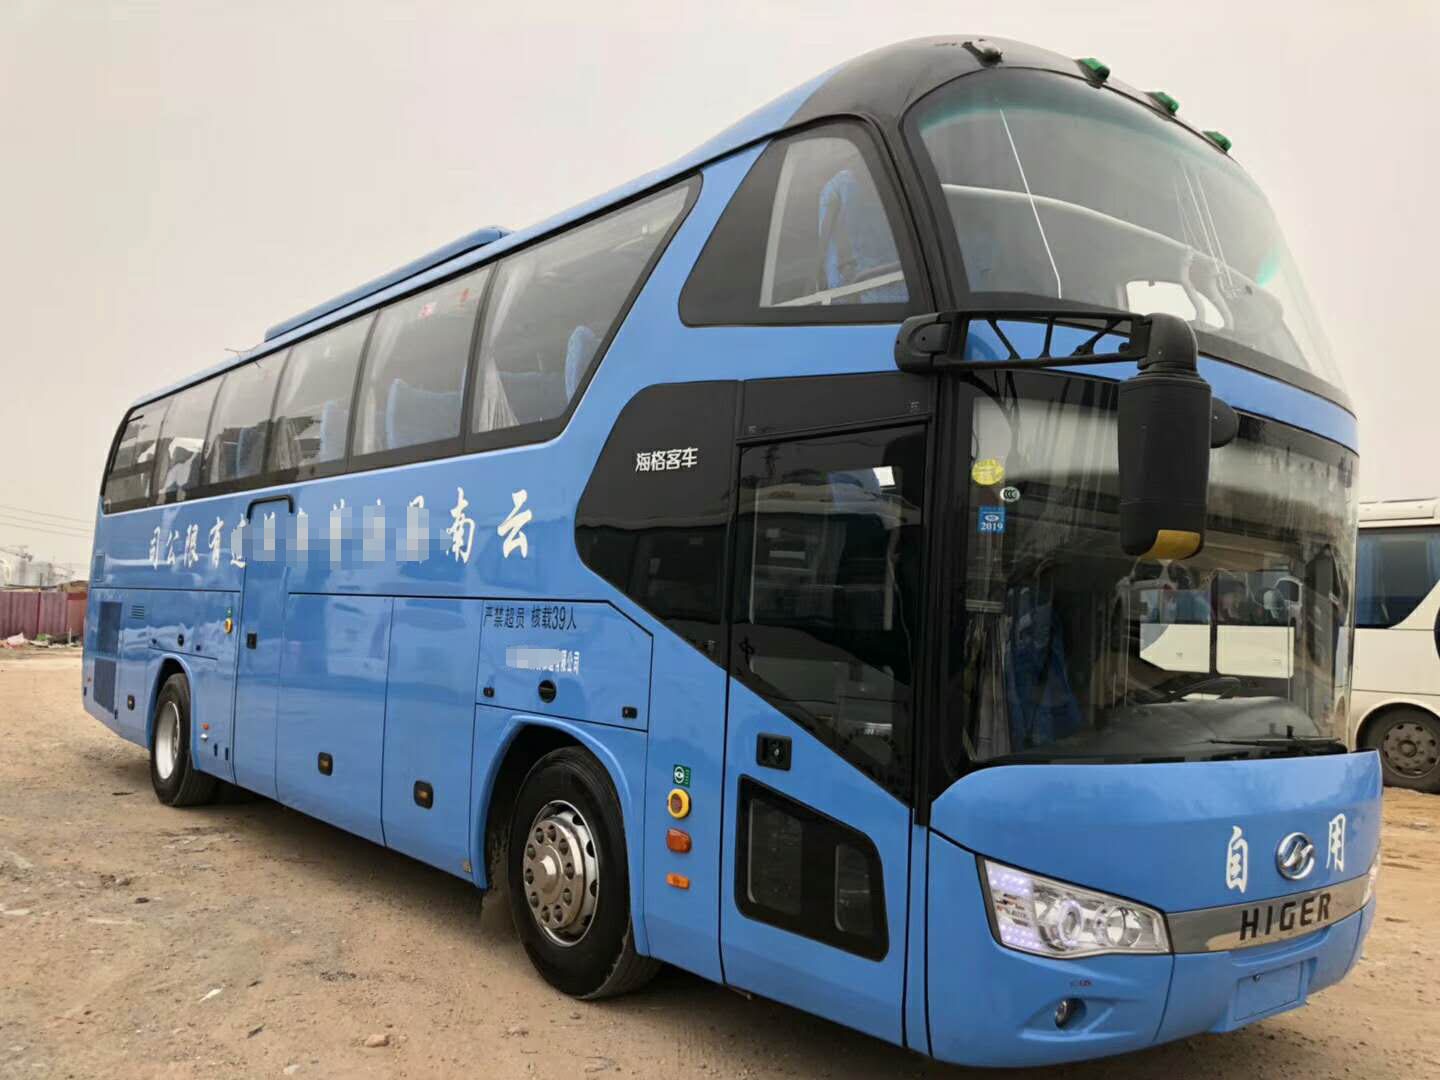 Current New Arrival Used Higer Coach Bus 39 Seats Diesel Blue A layer an half Wechai Run Good